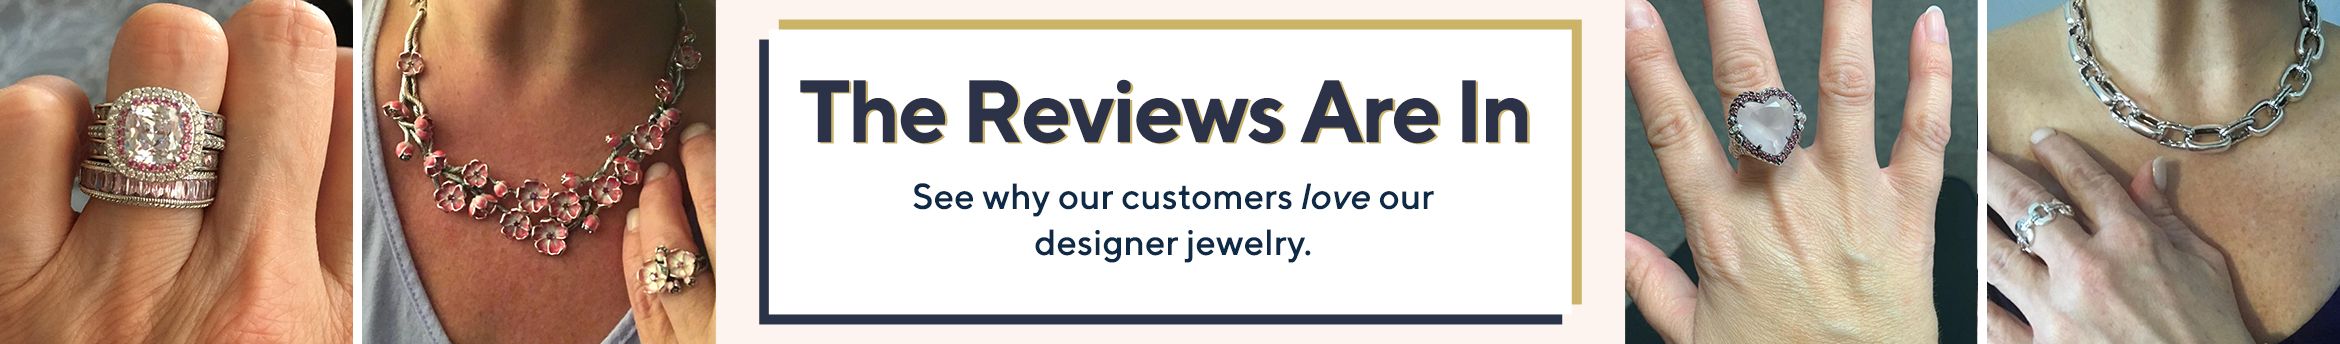 The Reviews Are In  See why our customers love our designer jewelry.